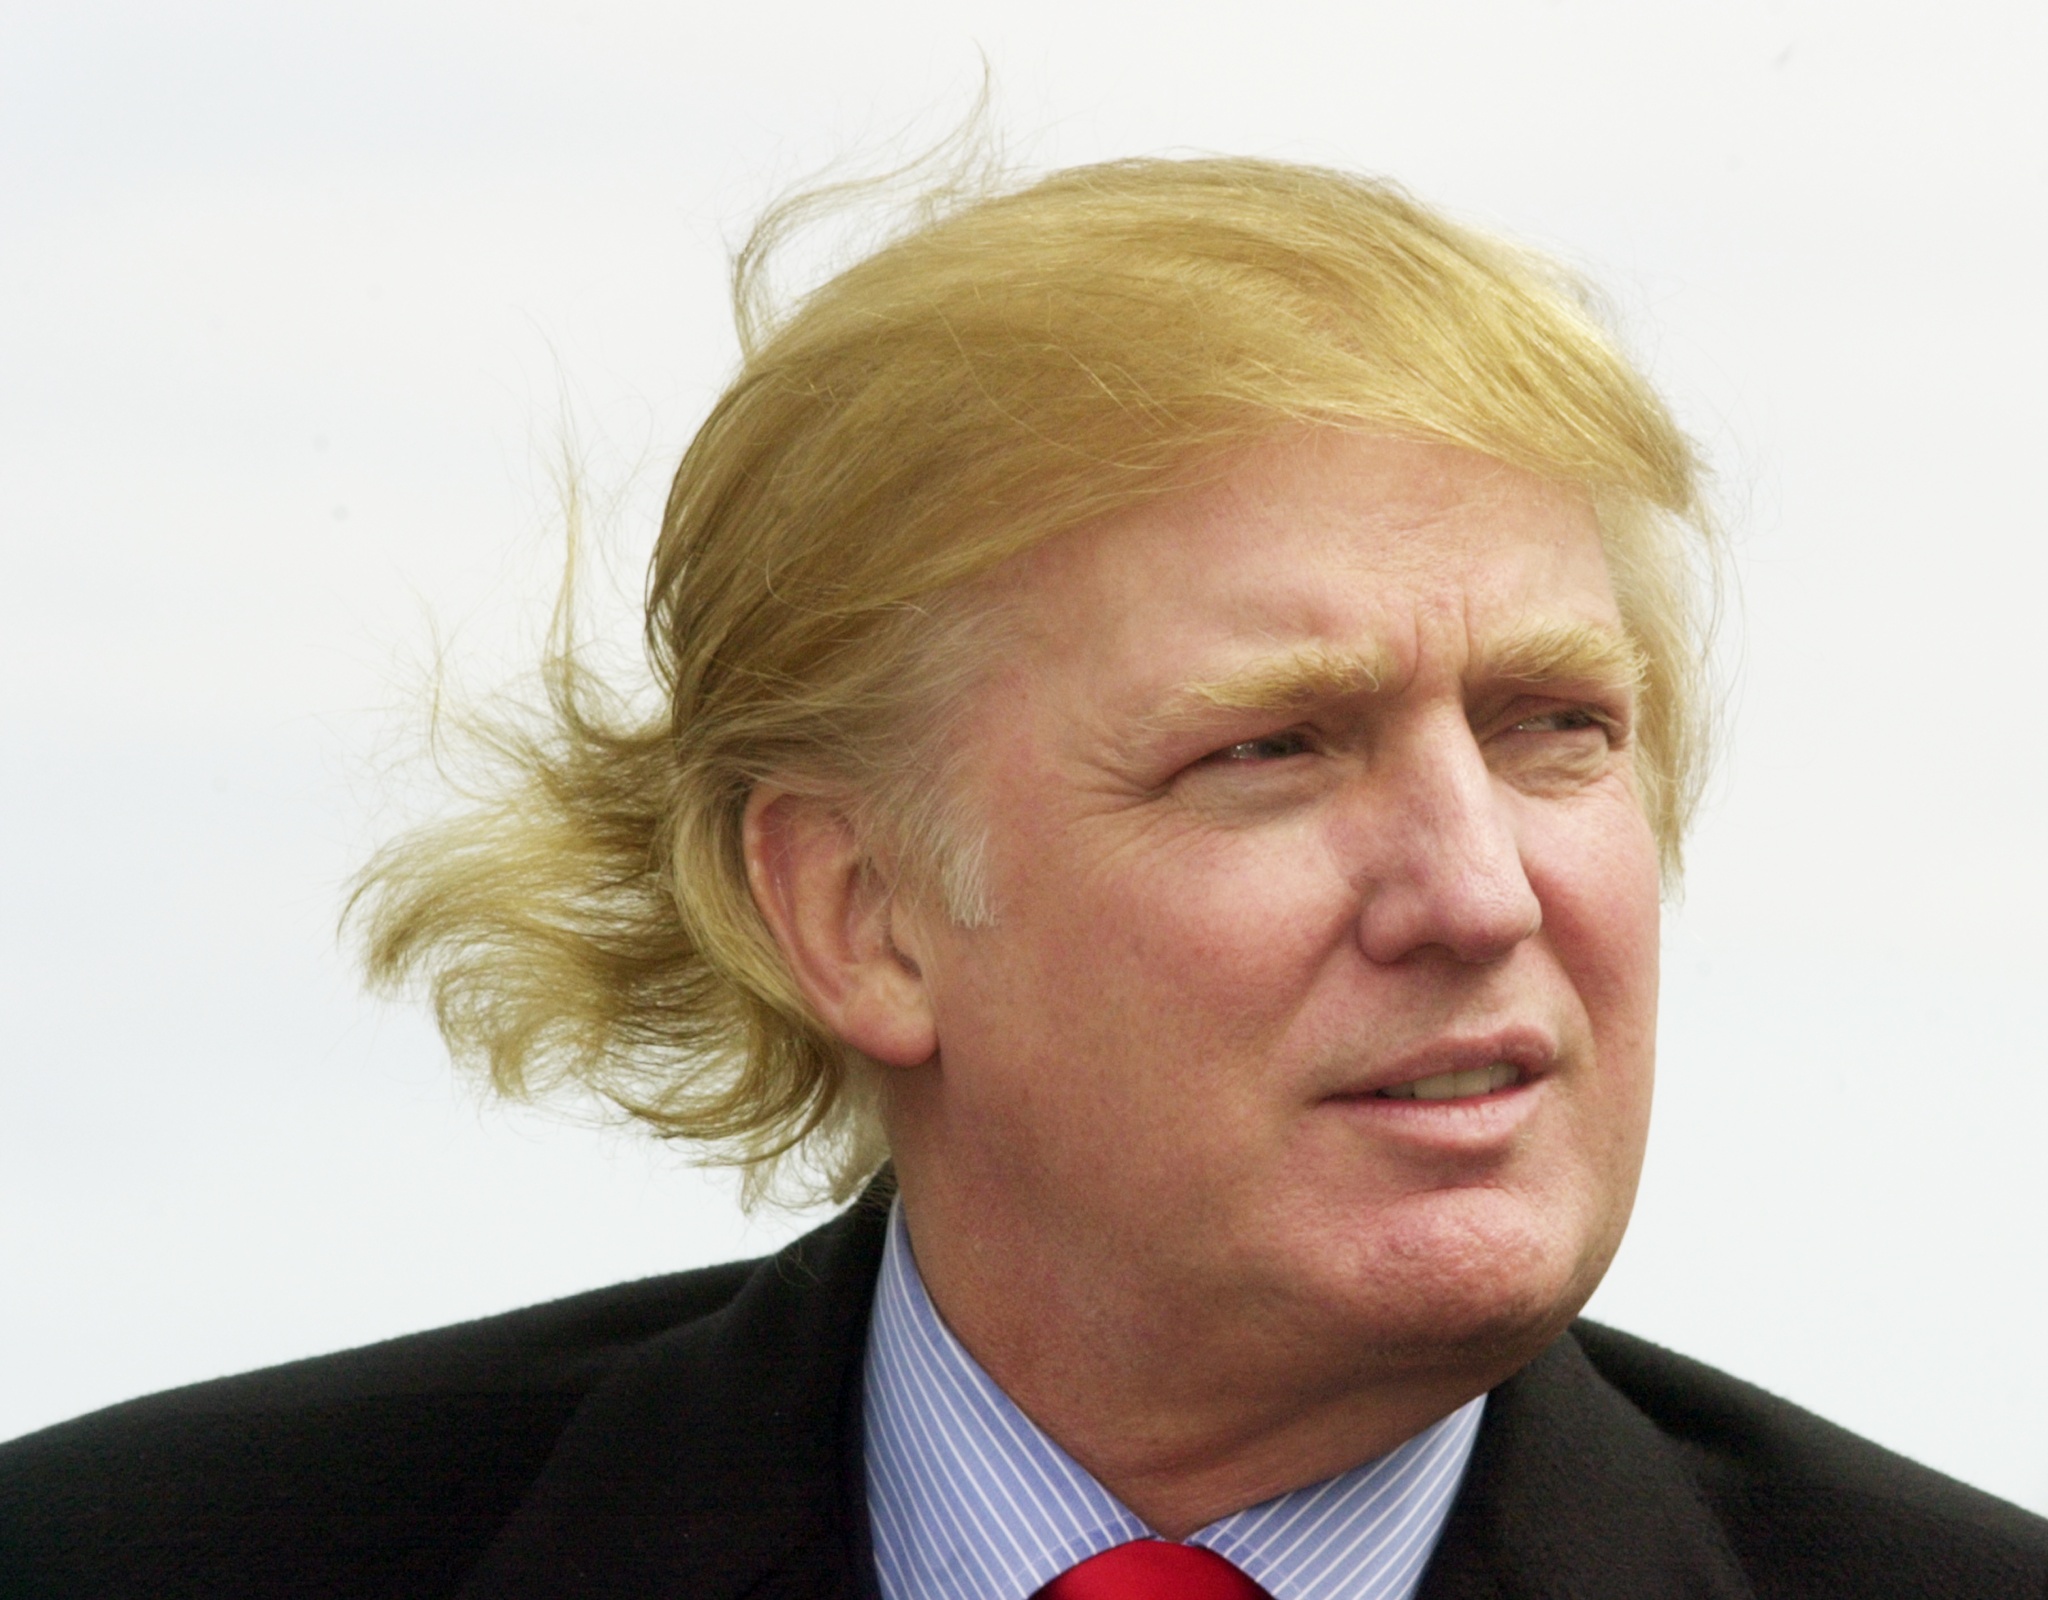 Trump's Hair Is a Big Deal. Here's the Science Behind It - wide 8